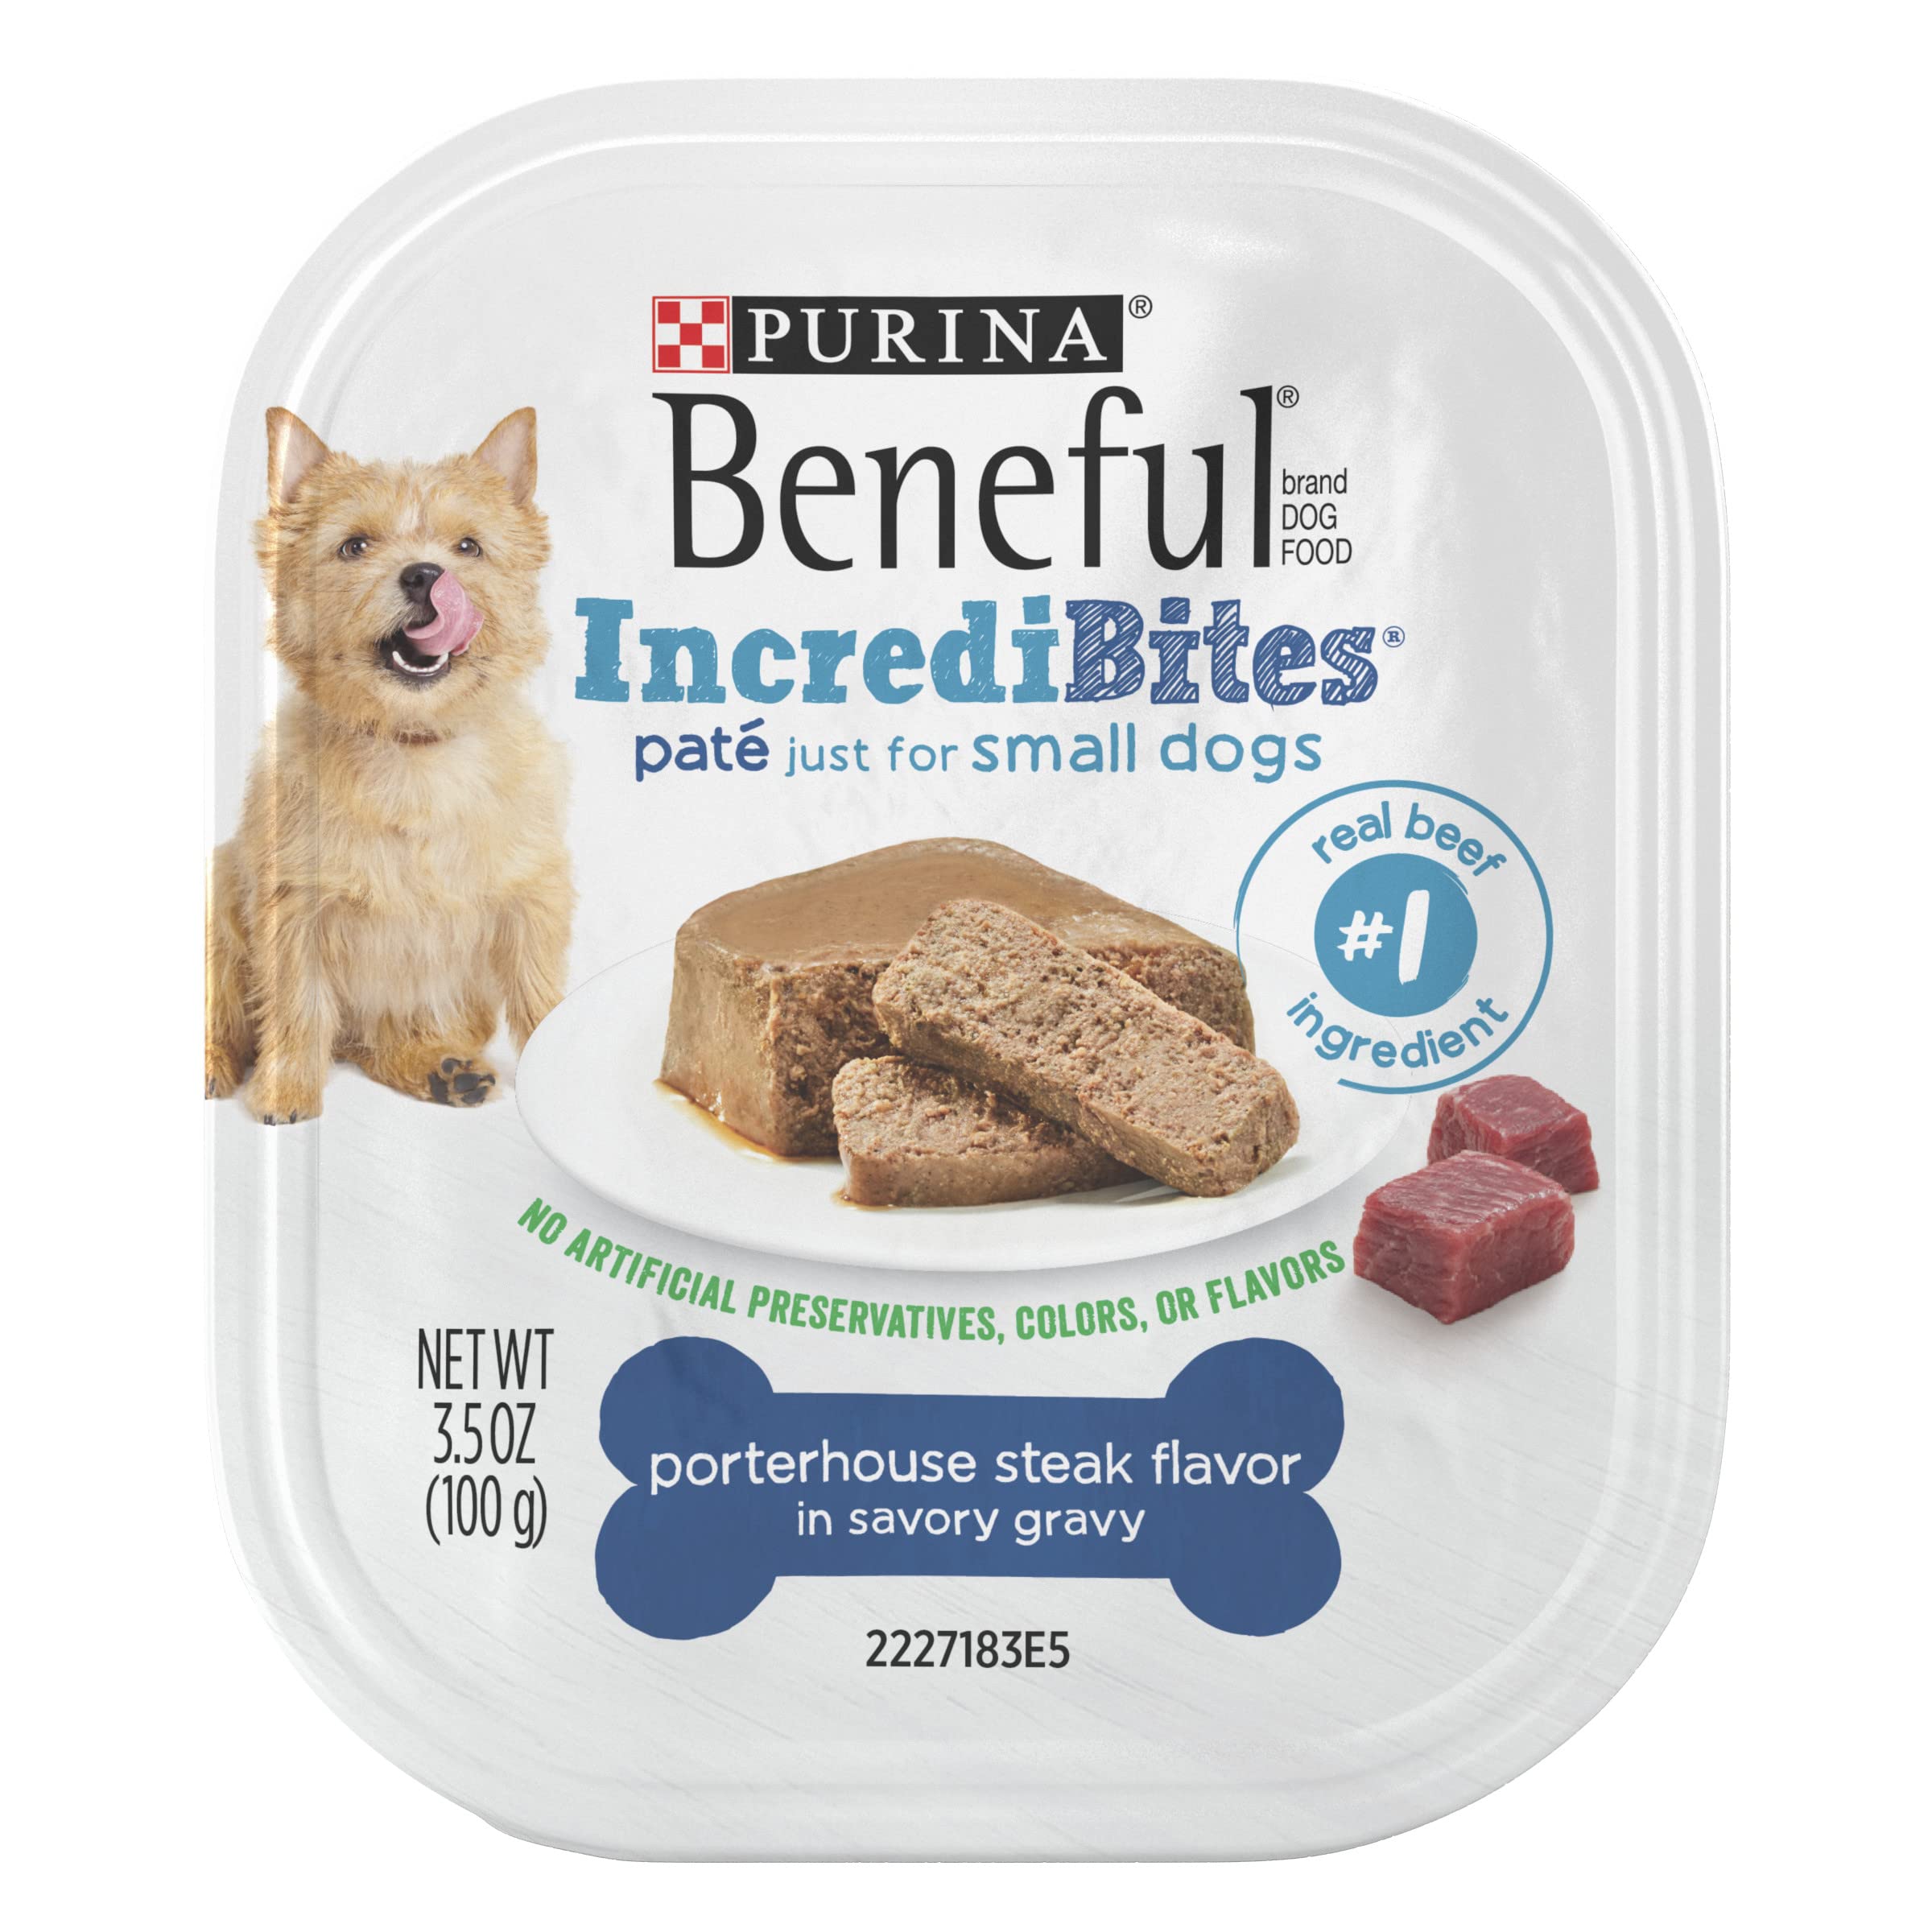 12-Pack 3.5-Oz Beneful IncrediBites Pate Wet Dog Food for Small Dogs (Porterhouse Steak) $11.85 w/ S&S + Free S&H w/ Prime or $35+